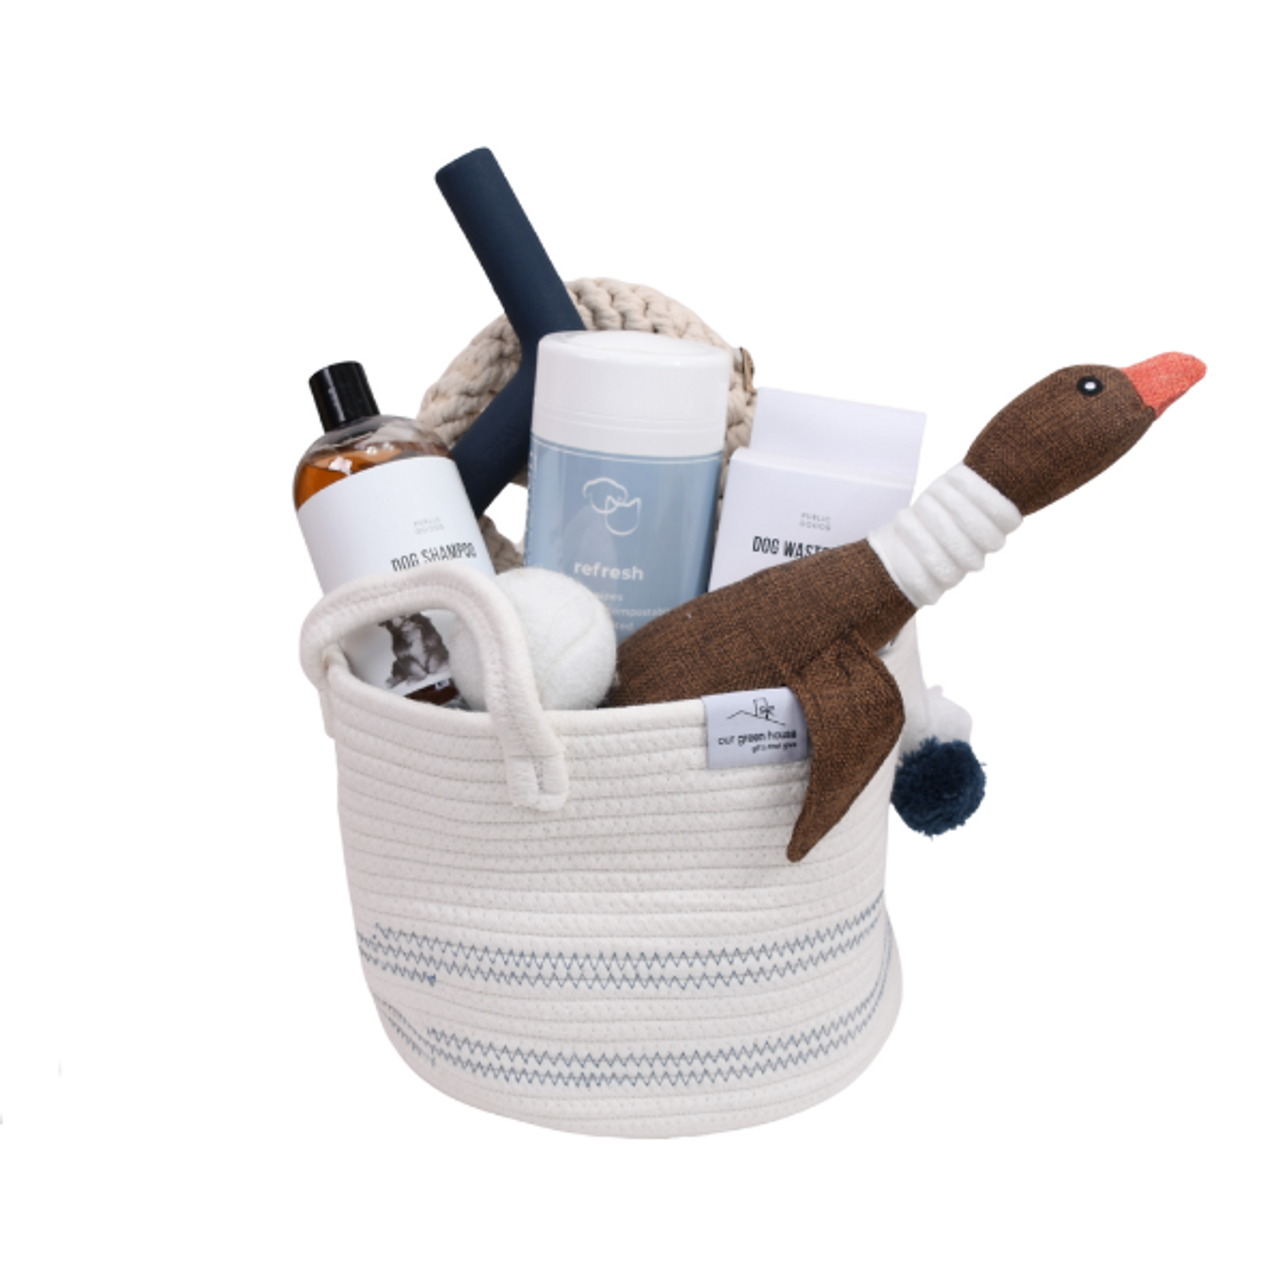 Playful Pup Gift Basket - Out of the Blue